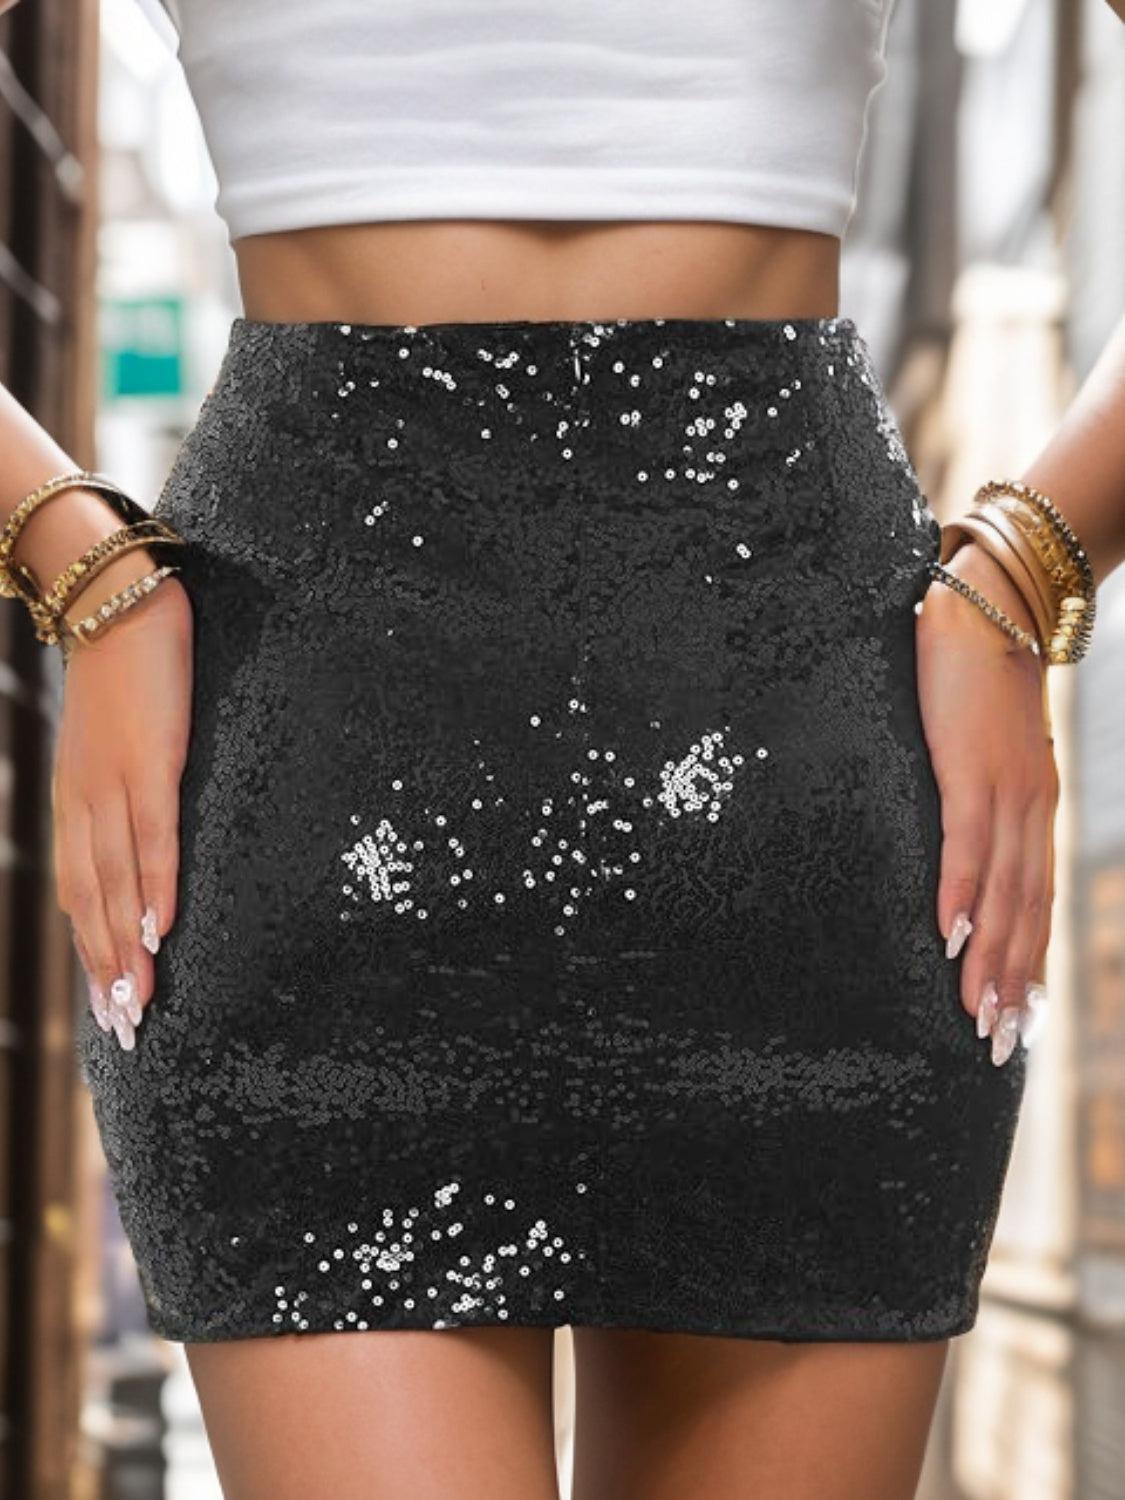 a woman in a white top and black sequin skirt